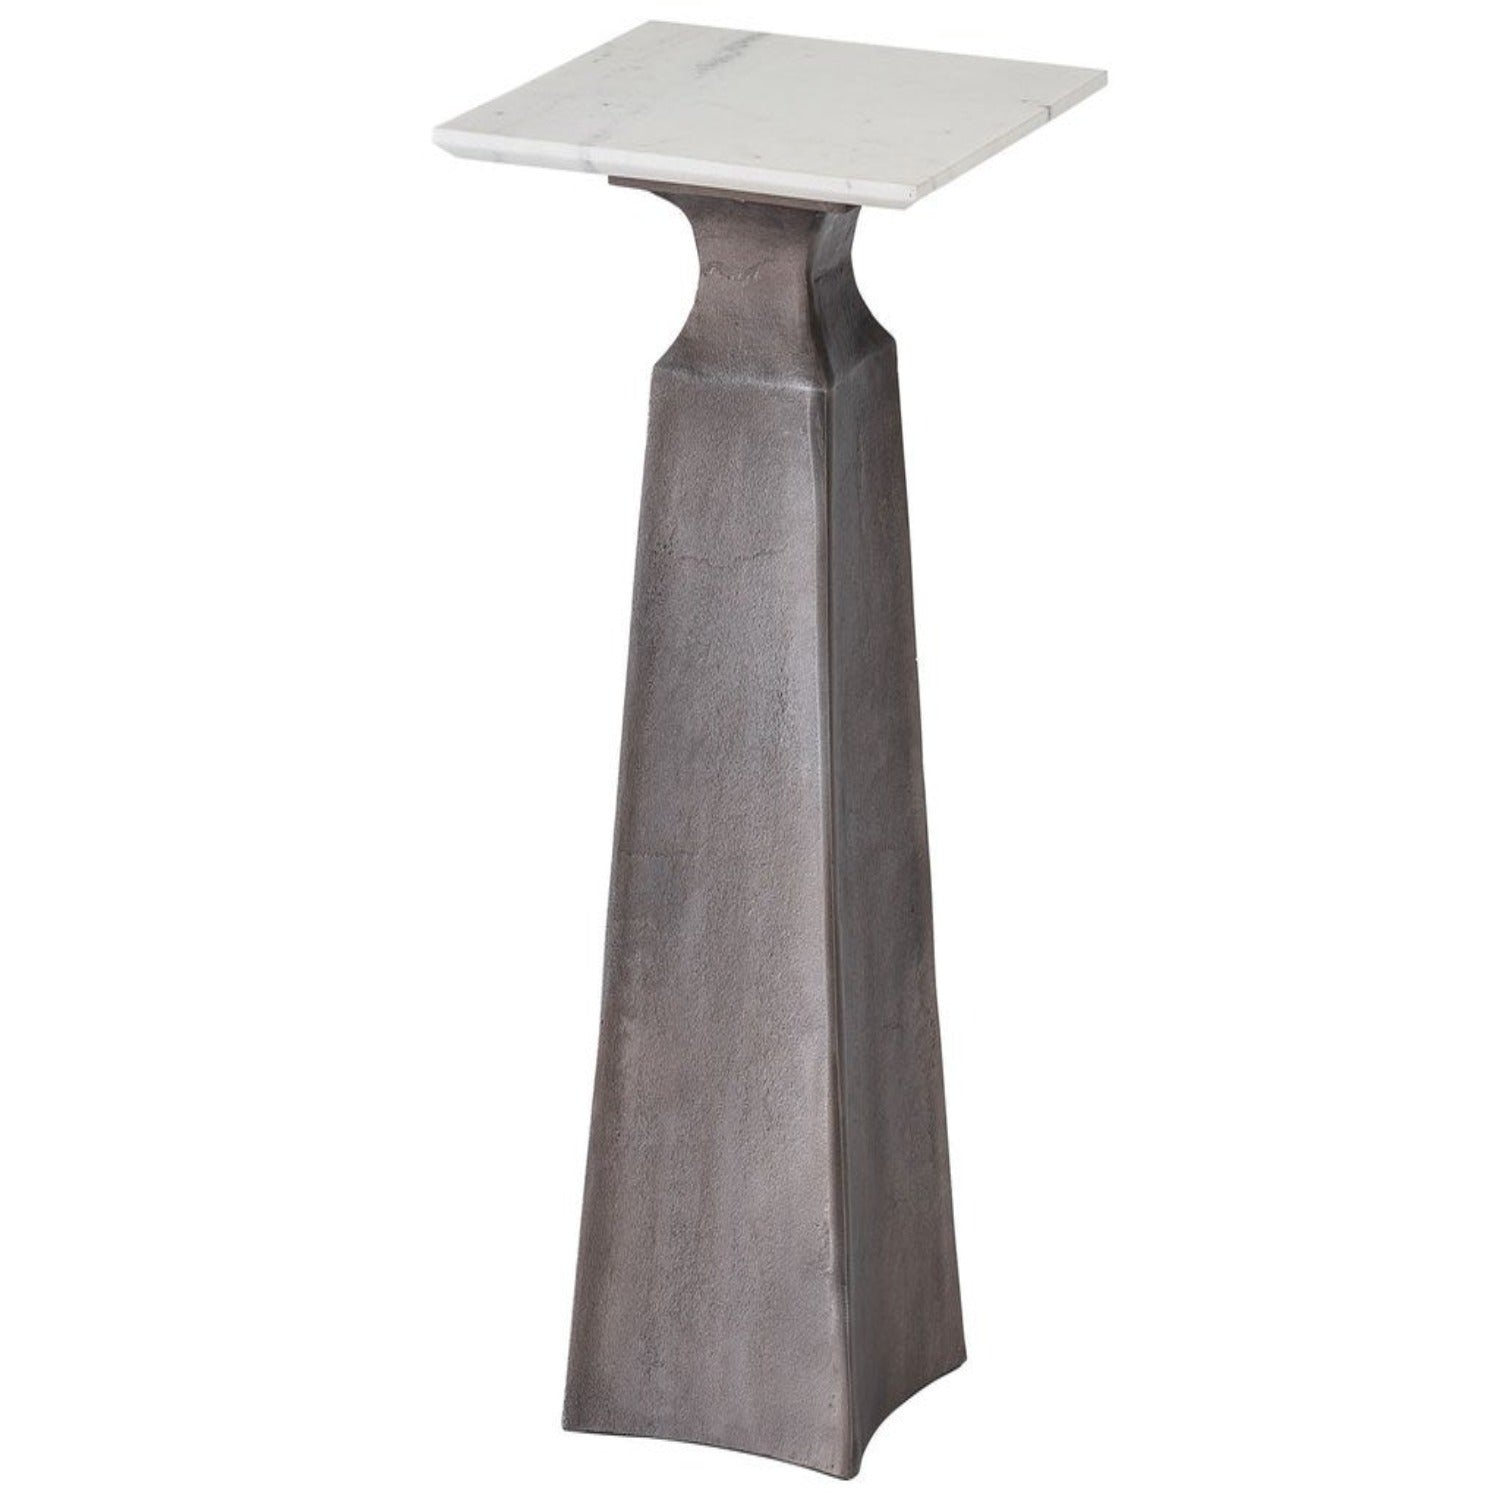 Figuration Side Table